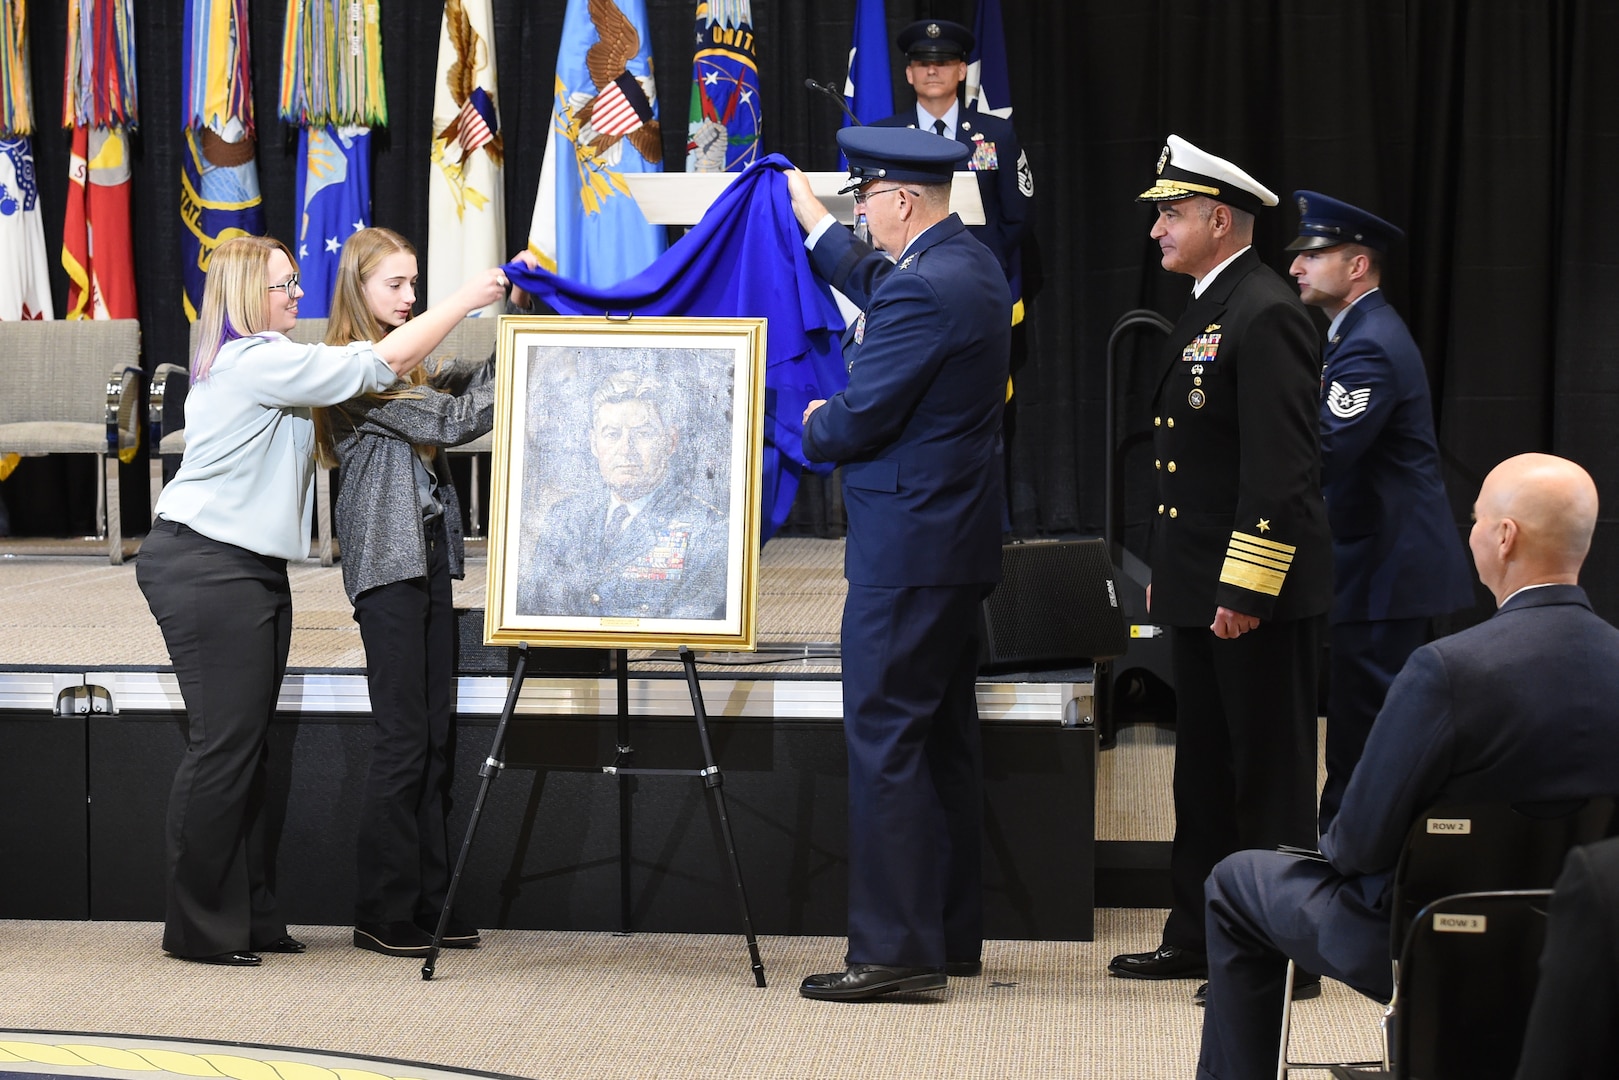 U.S. Air Force Gen. John E. Hyten, commander of U.S. Strategic Command (USSTRATCOM), unveils a portrait of U.S. Air Force Gen. Curtis E. LeMay during a building dedication ceremony held at Offutt Air Force Base, Neb, Nov. 18, 2019. USSTRATCOM dedicated its new command and control facility to LeMay, which is the heart of the Department of Defense's nuclear command, control, and communications enterprise. (U.S. Air Force photo by Staff Sgt. Ian Hoachlander)